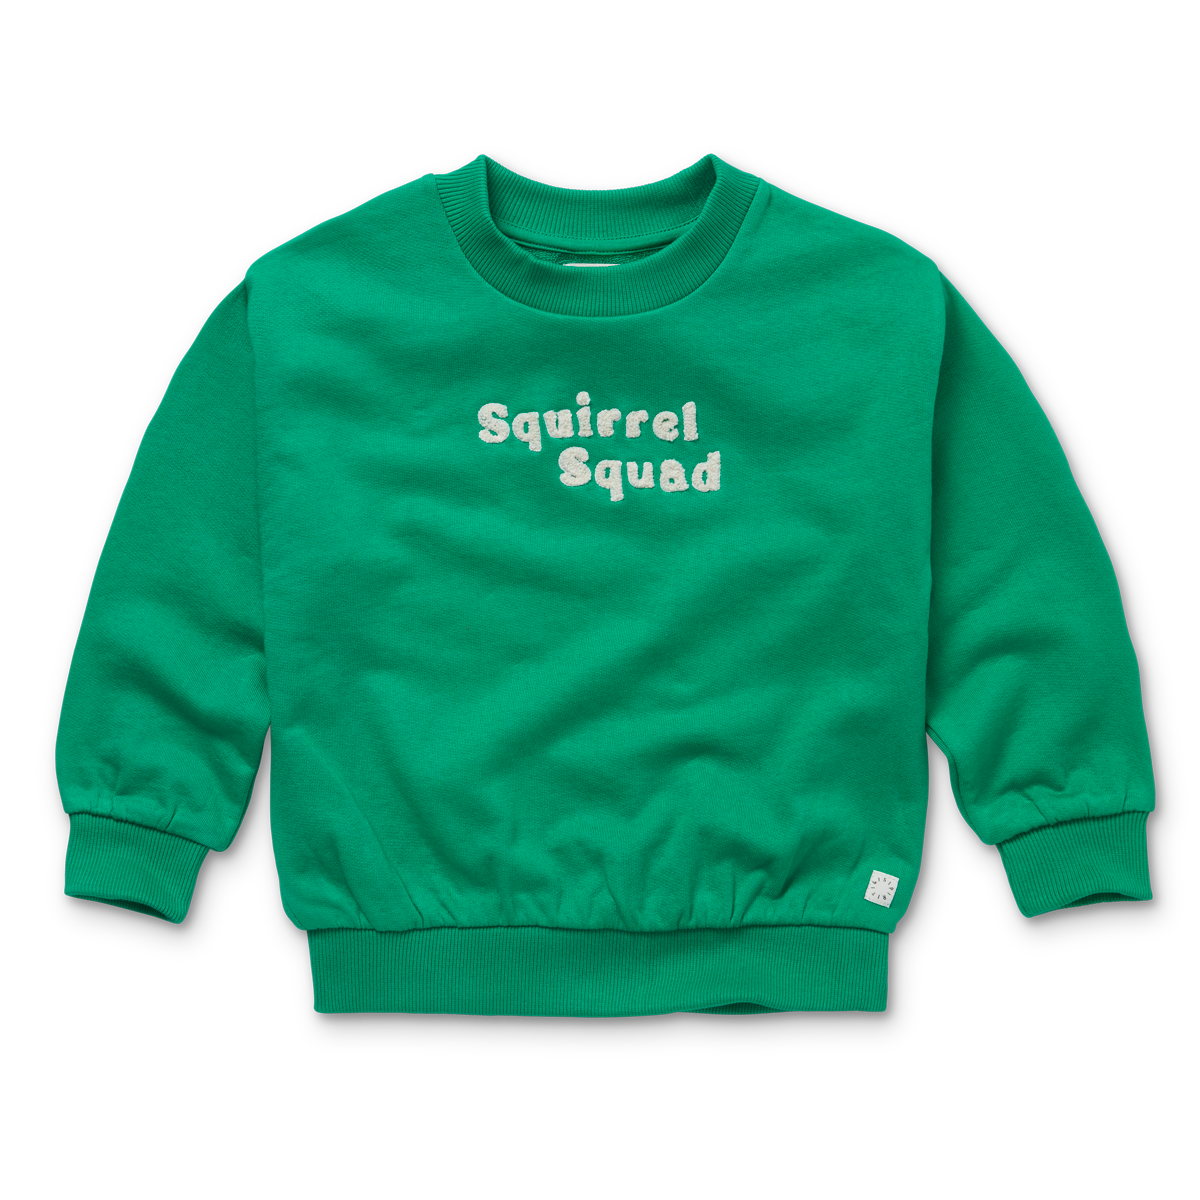 Sproet & Sprout - Sweatshirt embroidery Squirrel squad